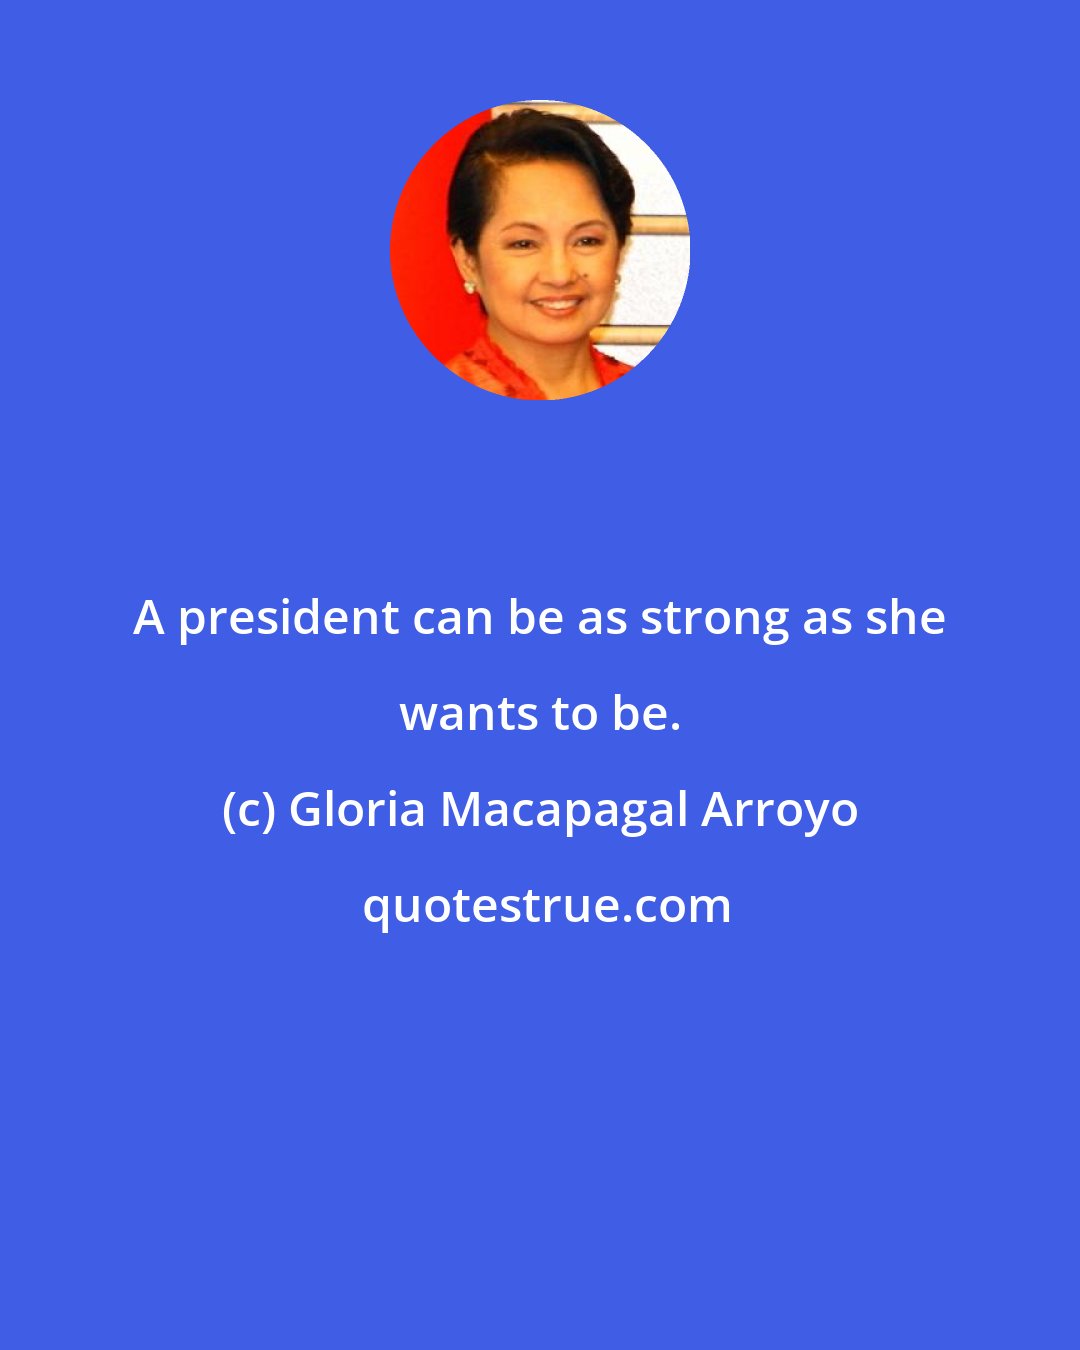 Gloria Macapagal Arroyo: A president can be as strong as she wants to be.